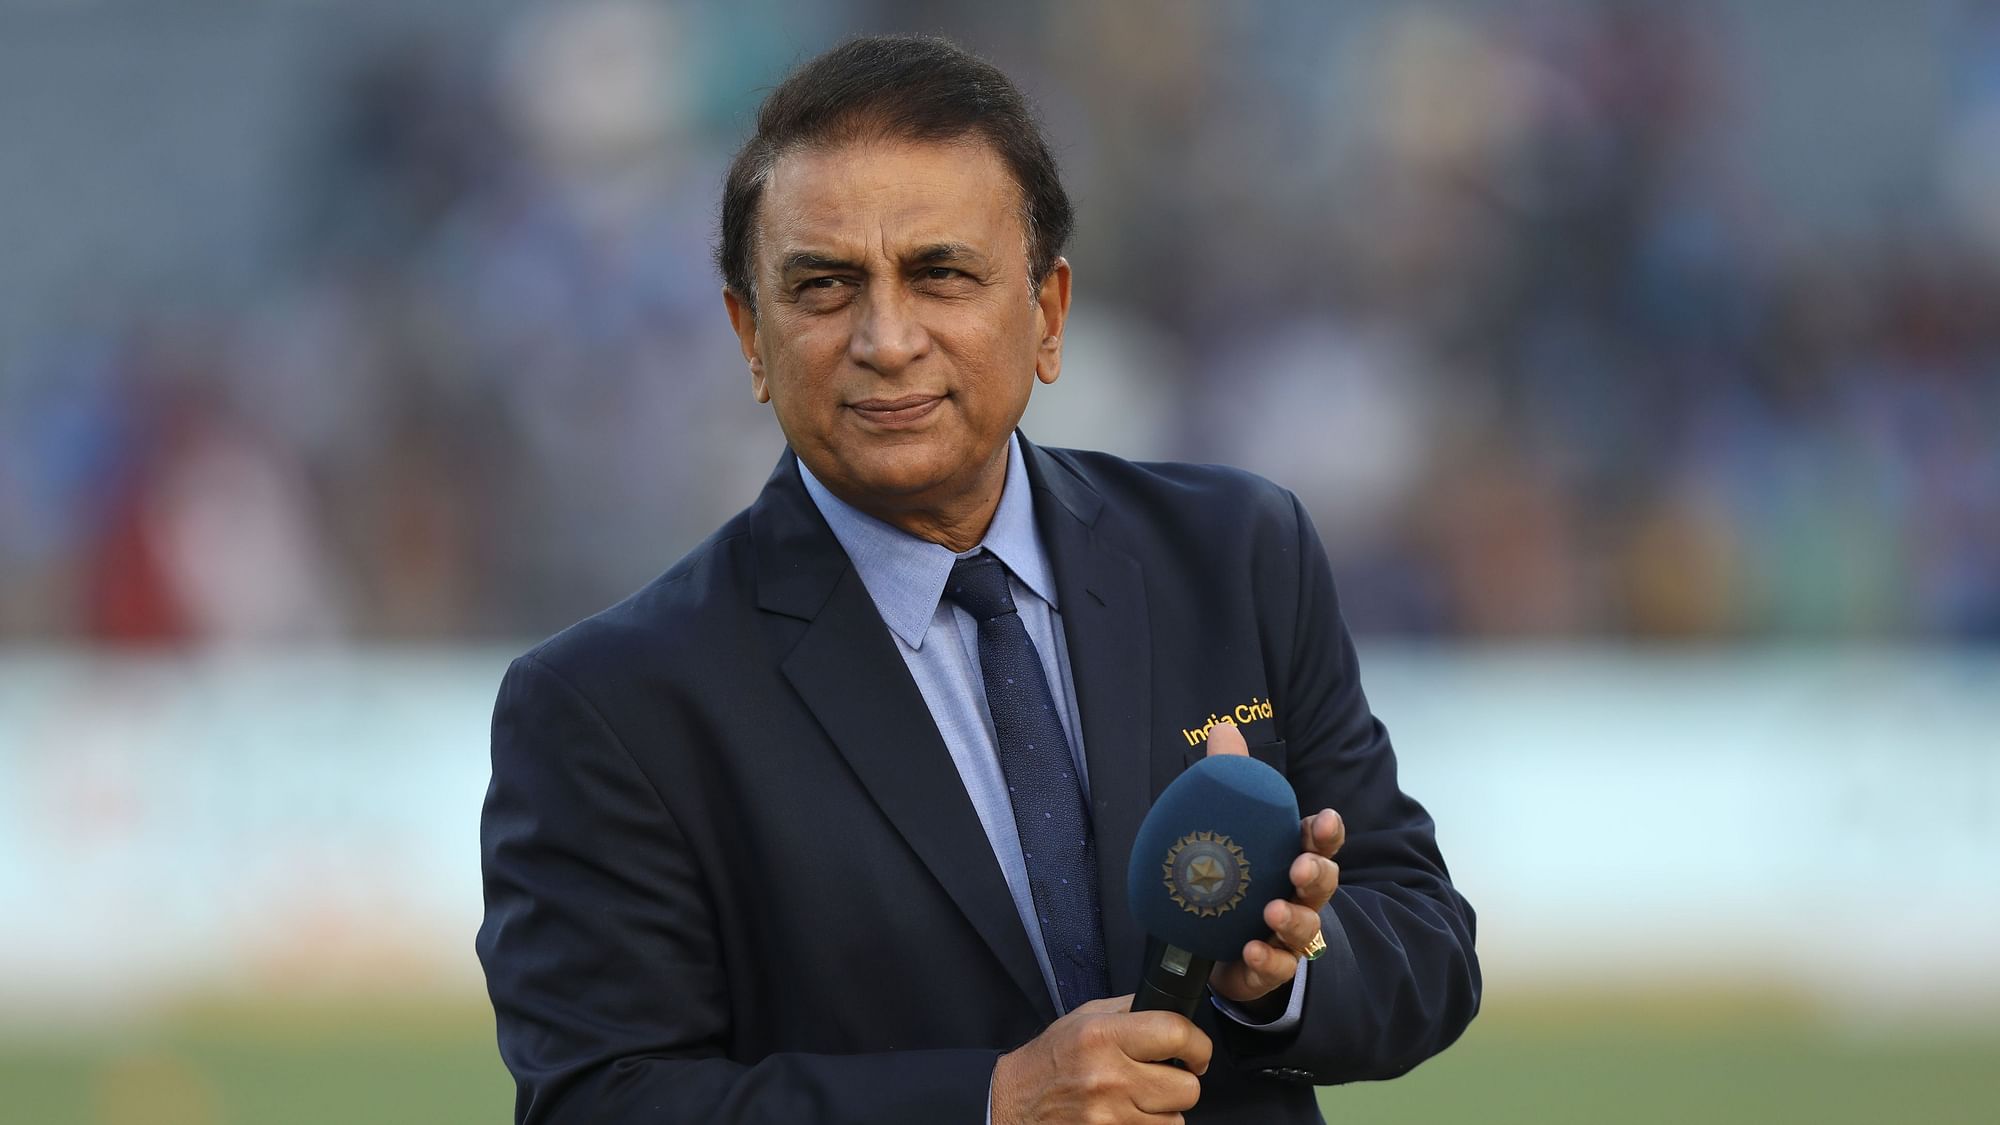 Sunil Gavaskar believes that Rohit Sharma being available for India is the most important thing.